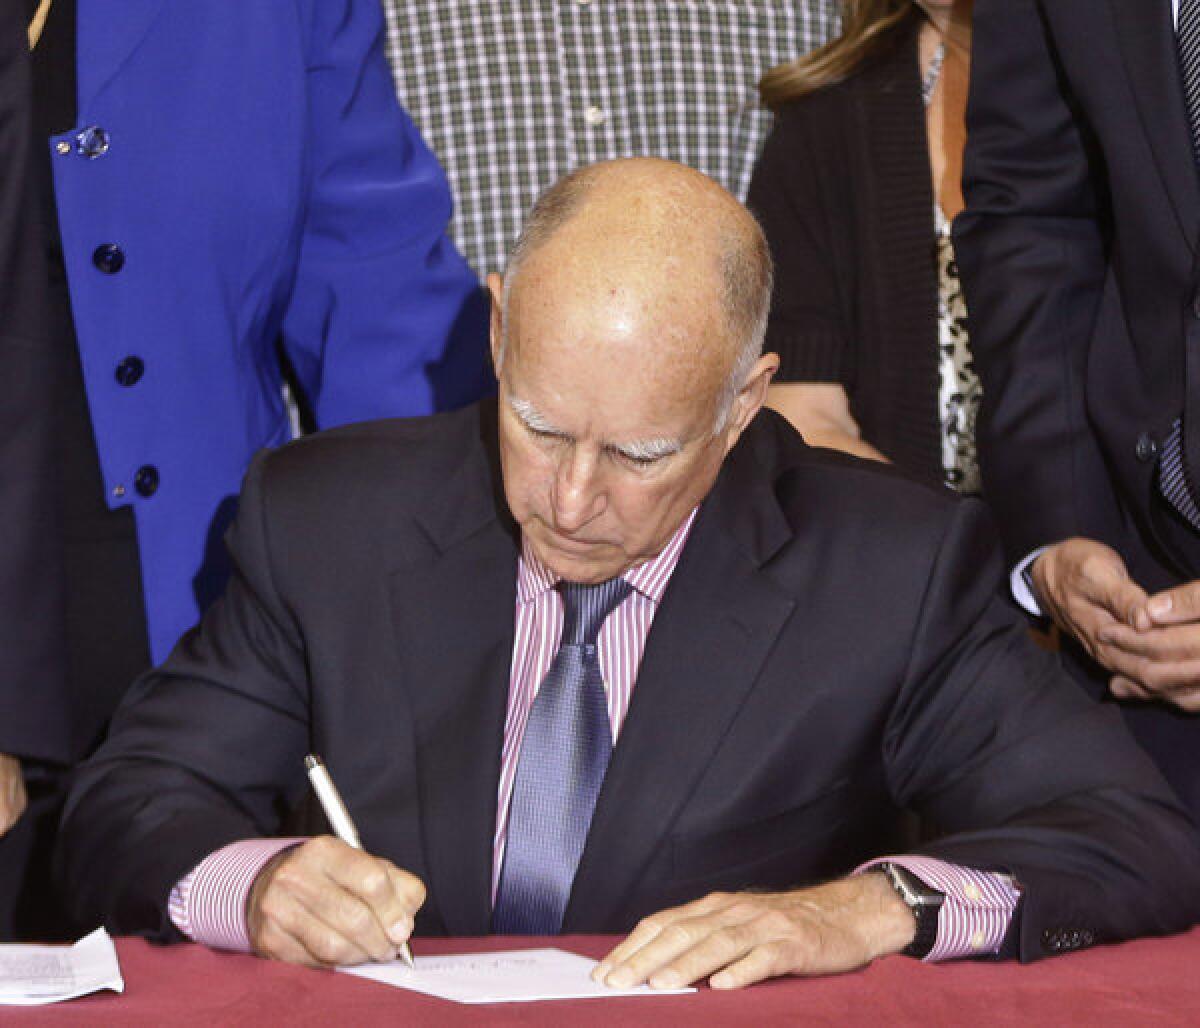 California Gov. Jerry Brown signs legislation into law Thursday. Under one bill, state community colleges will now be able to charge more for high-demand classes during summer and winter terms.